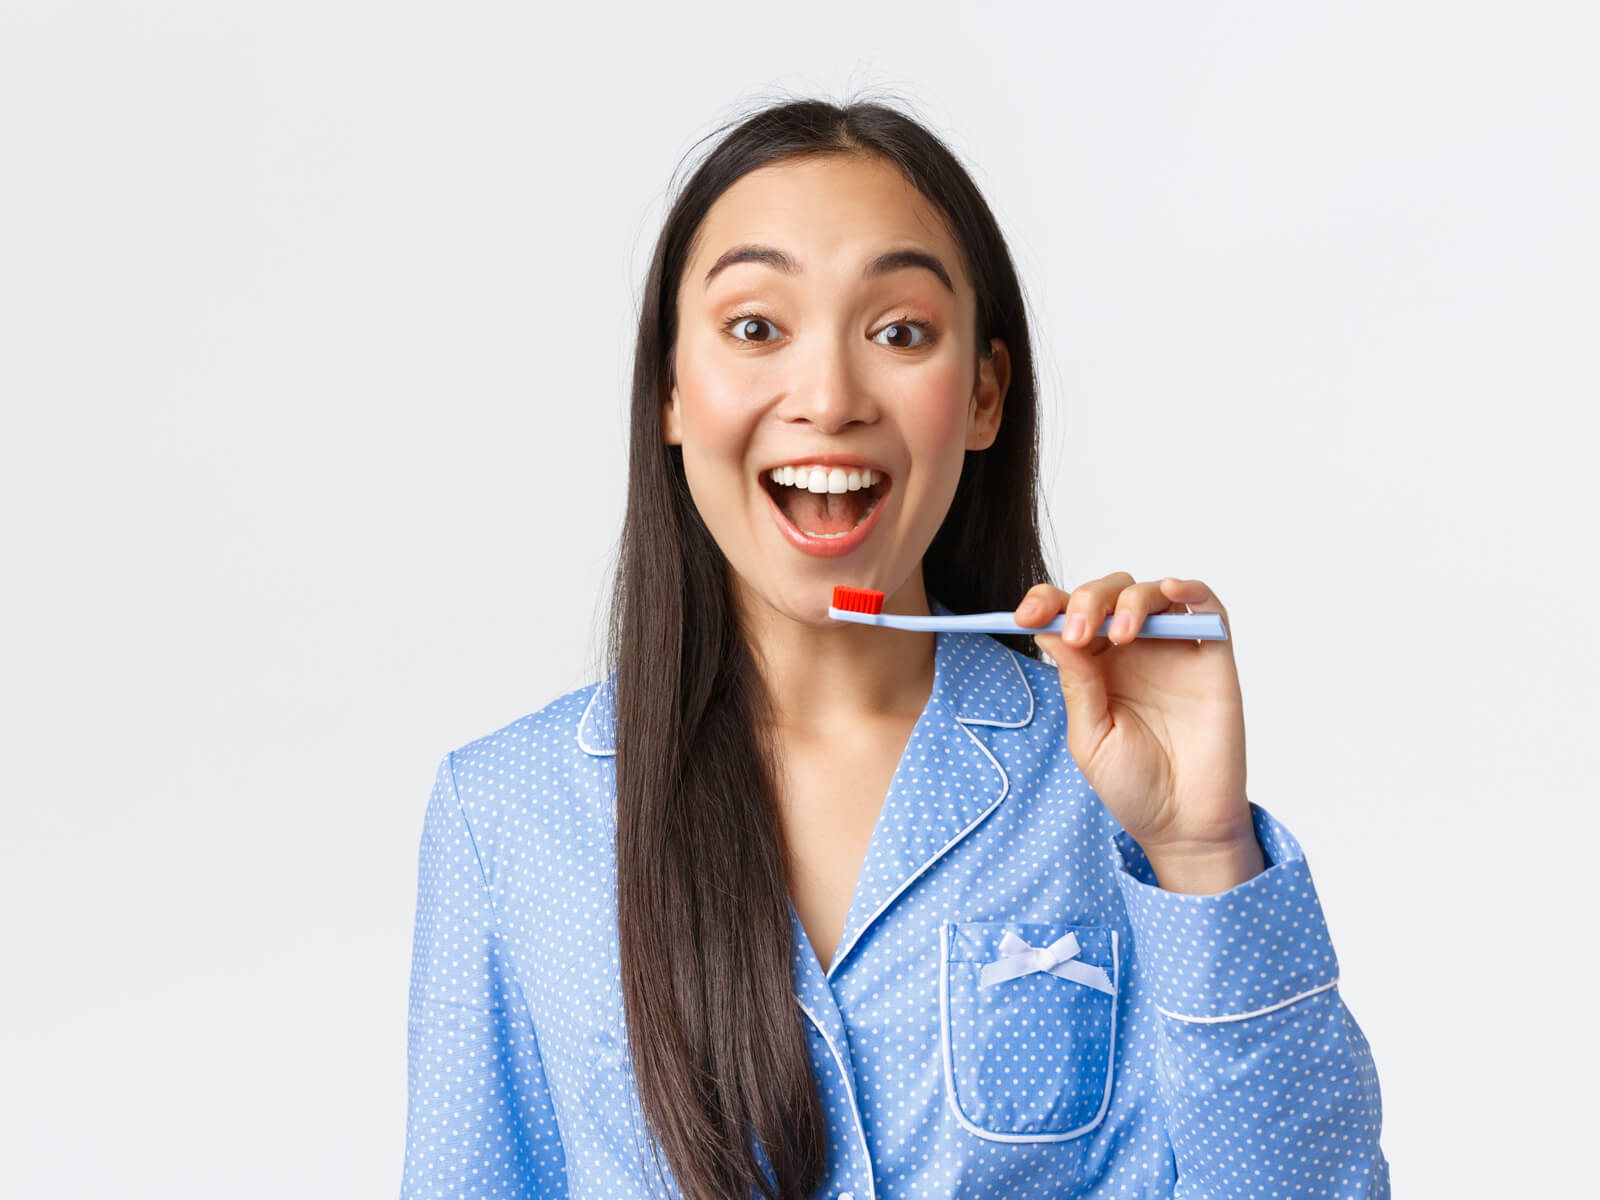 Is Brushing Teeth After Eating Good For You?